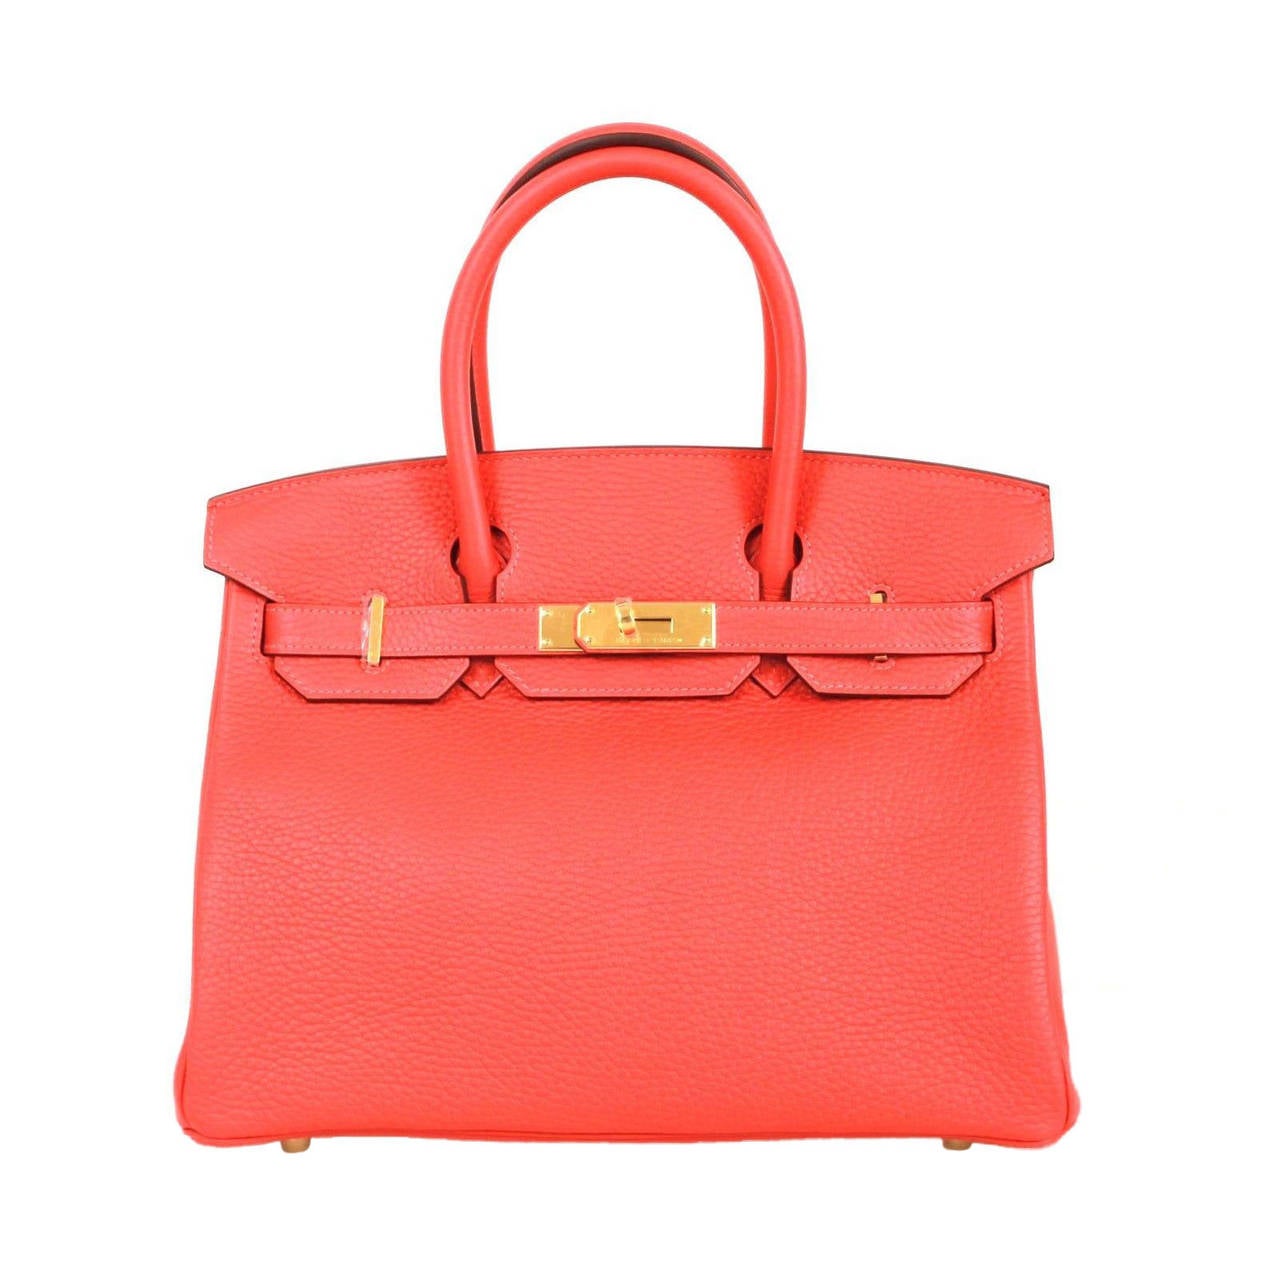 Hermes Rouge Pivione Clemence Leather Gold HDW 2015 30 cm Birkin Tote Bag For Sale